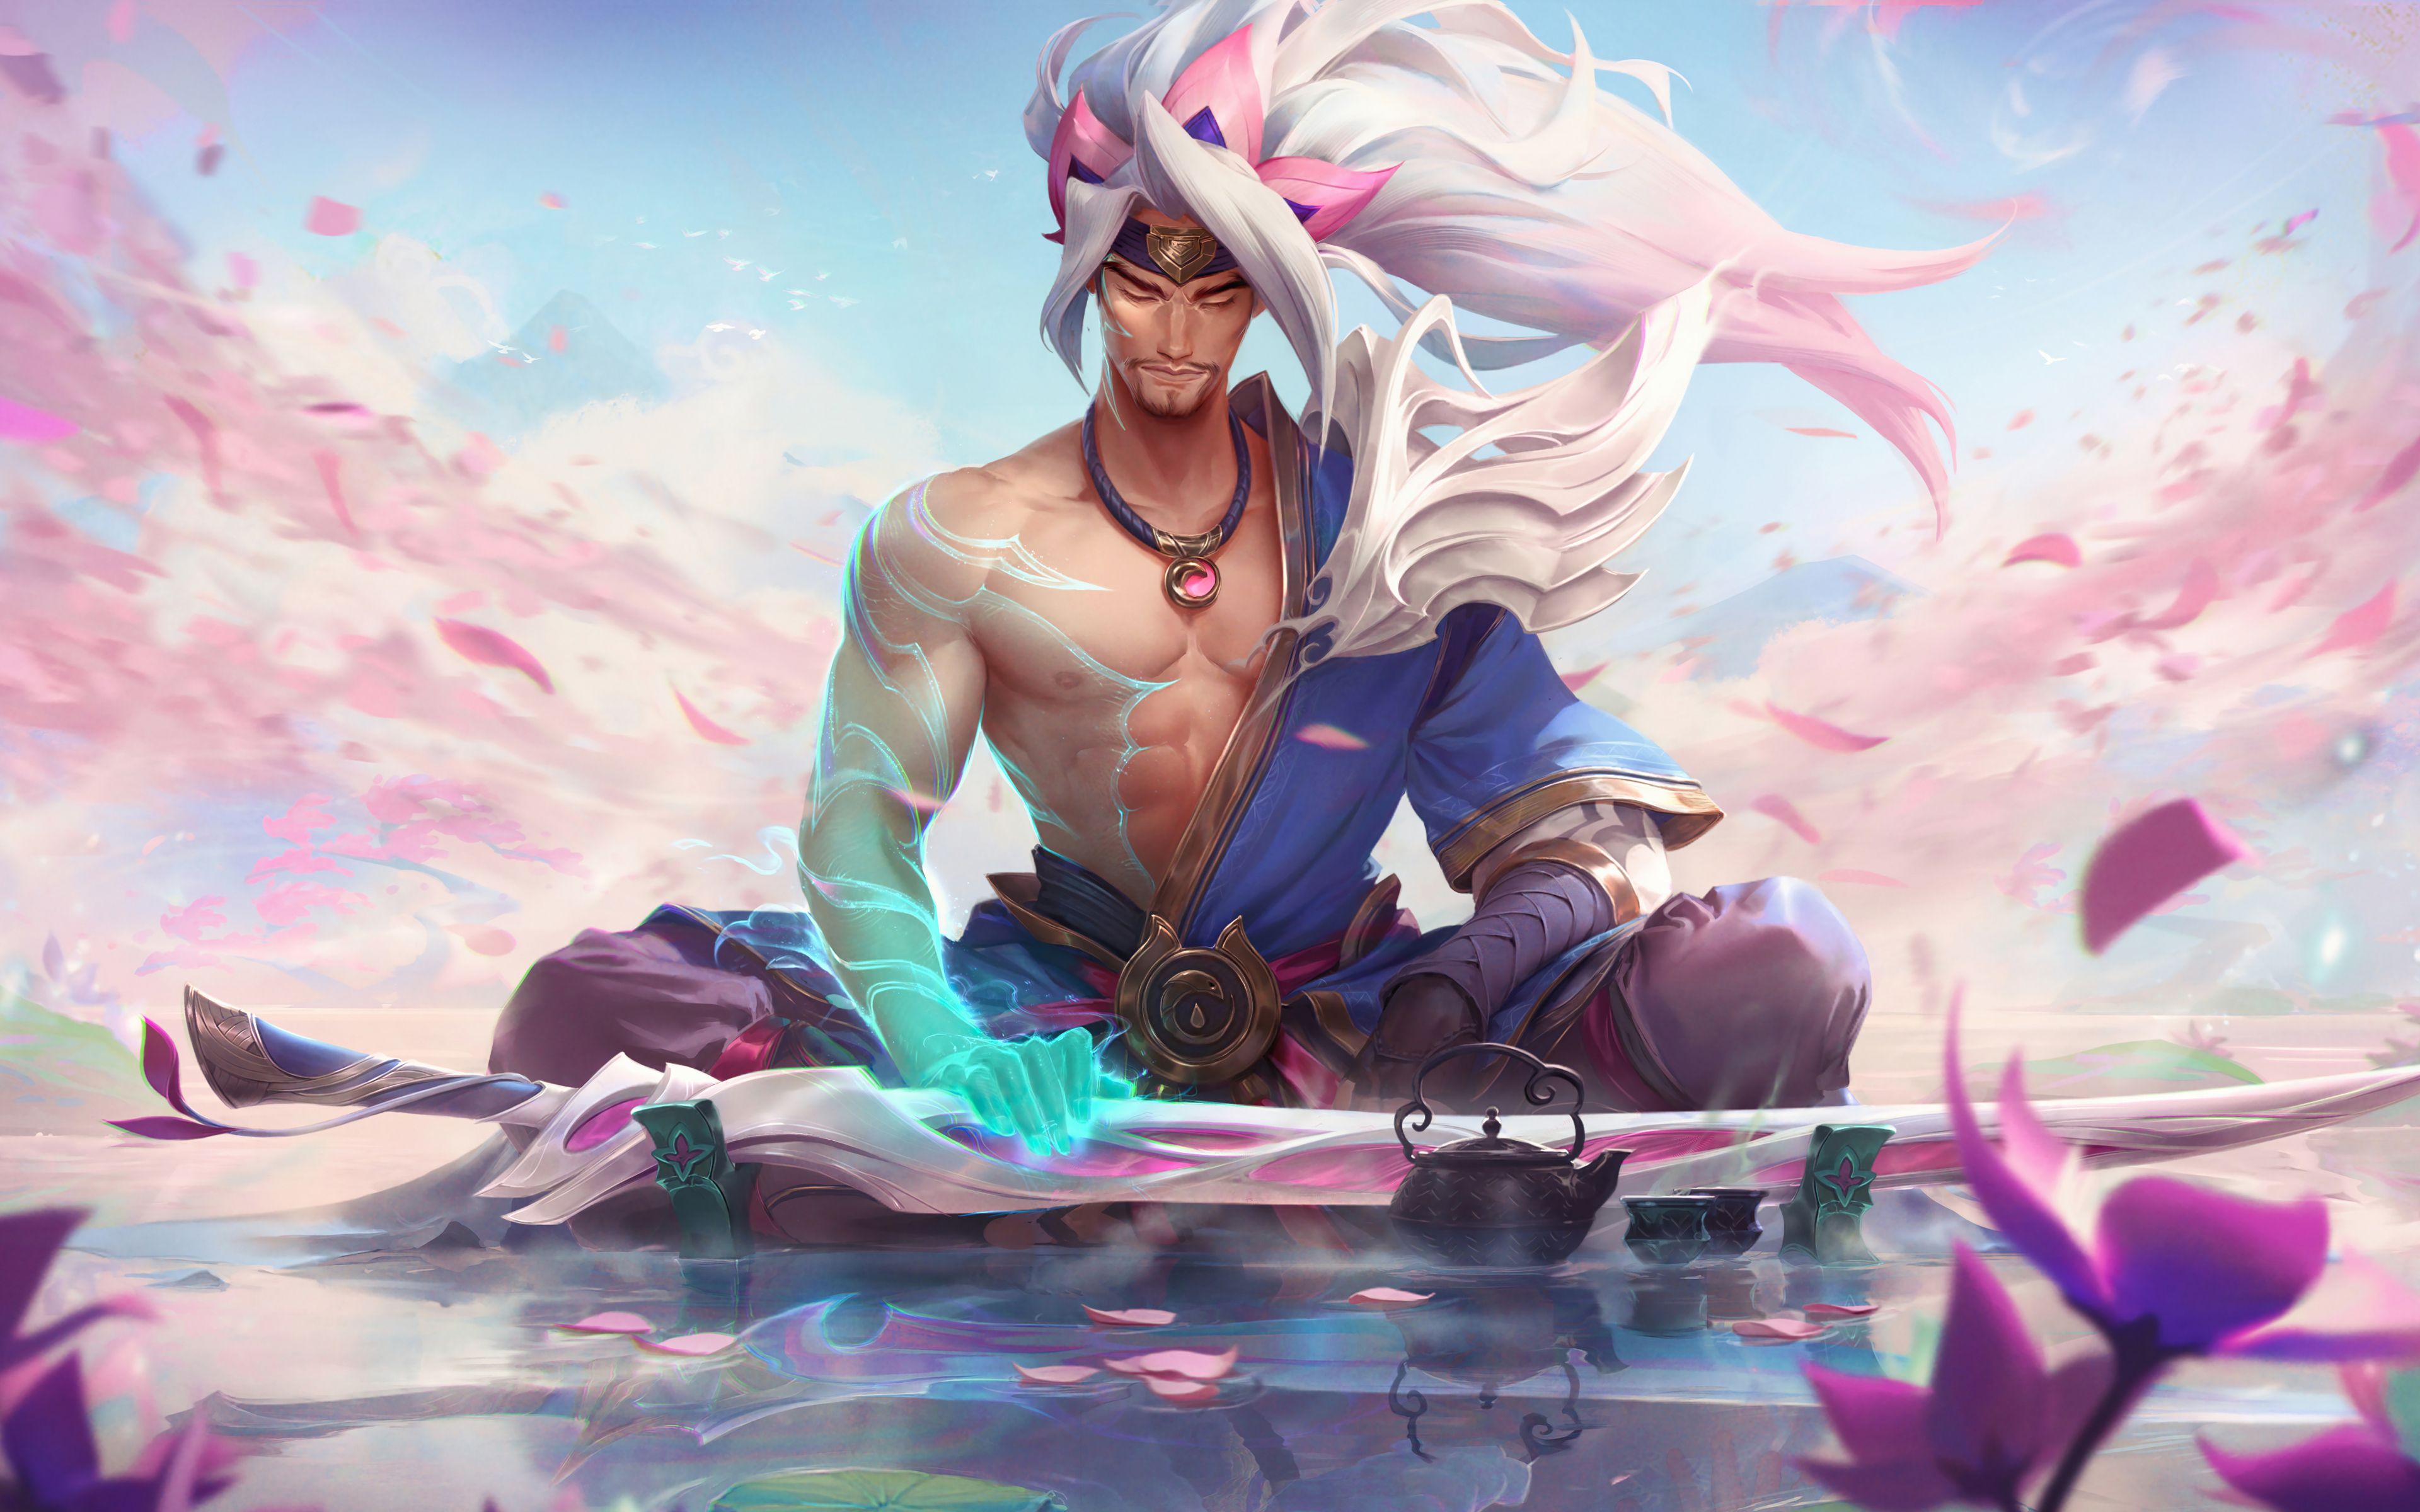 Download 3840x2400 wallpaper meditation, yasuo, league of legends, game, 4k, ultra HD 16: widescreen, 3840x2400 HD image, background, 25382